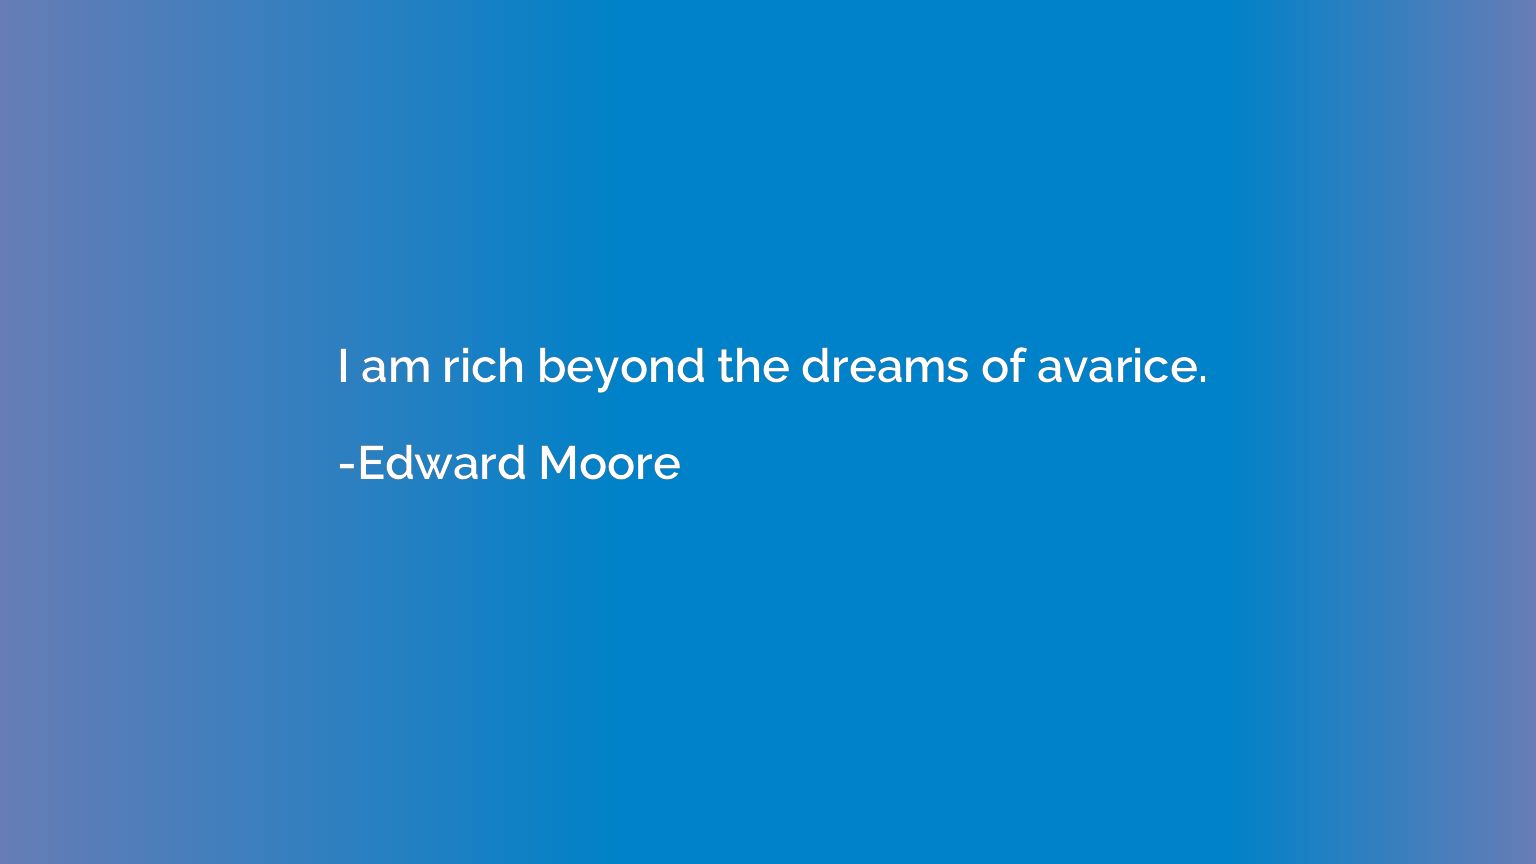 I am rich beyond the dreams of avarice.